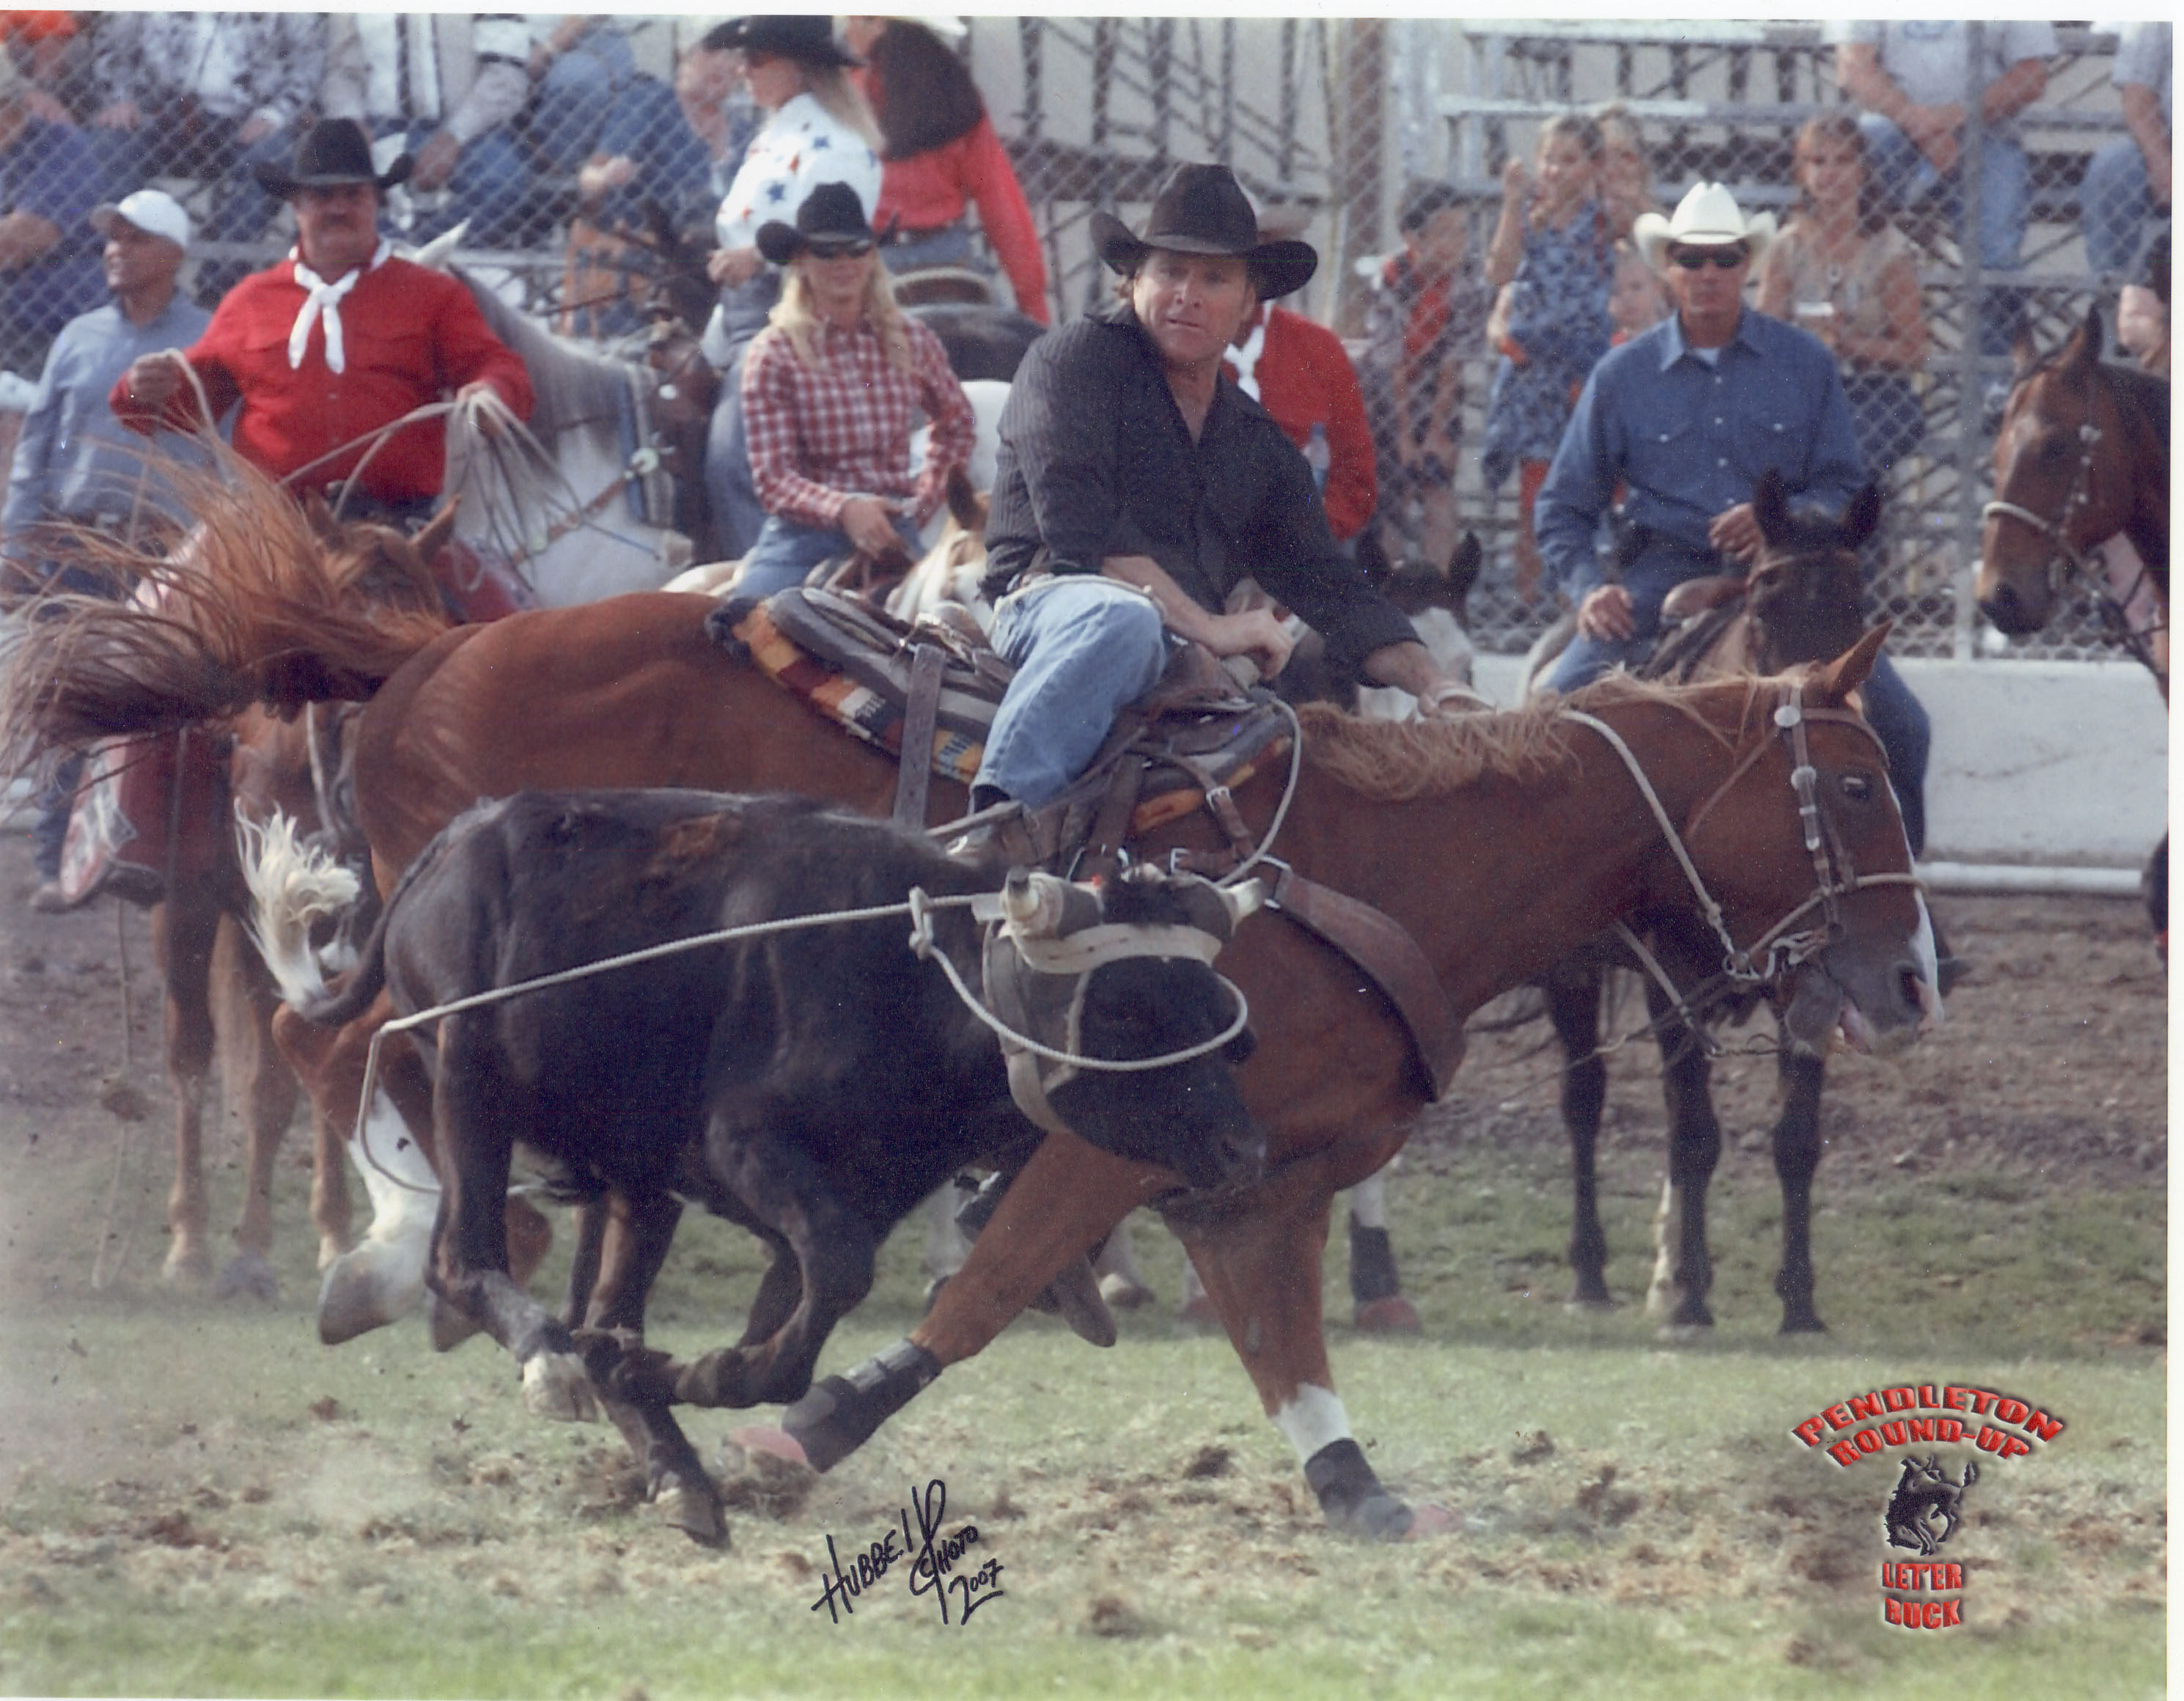 Competing at Pendleton Round-Up Rodeo